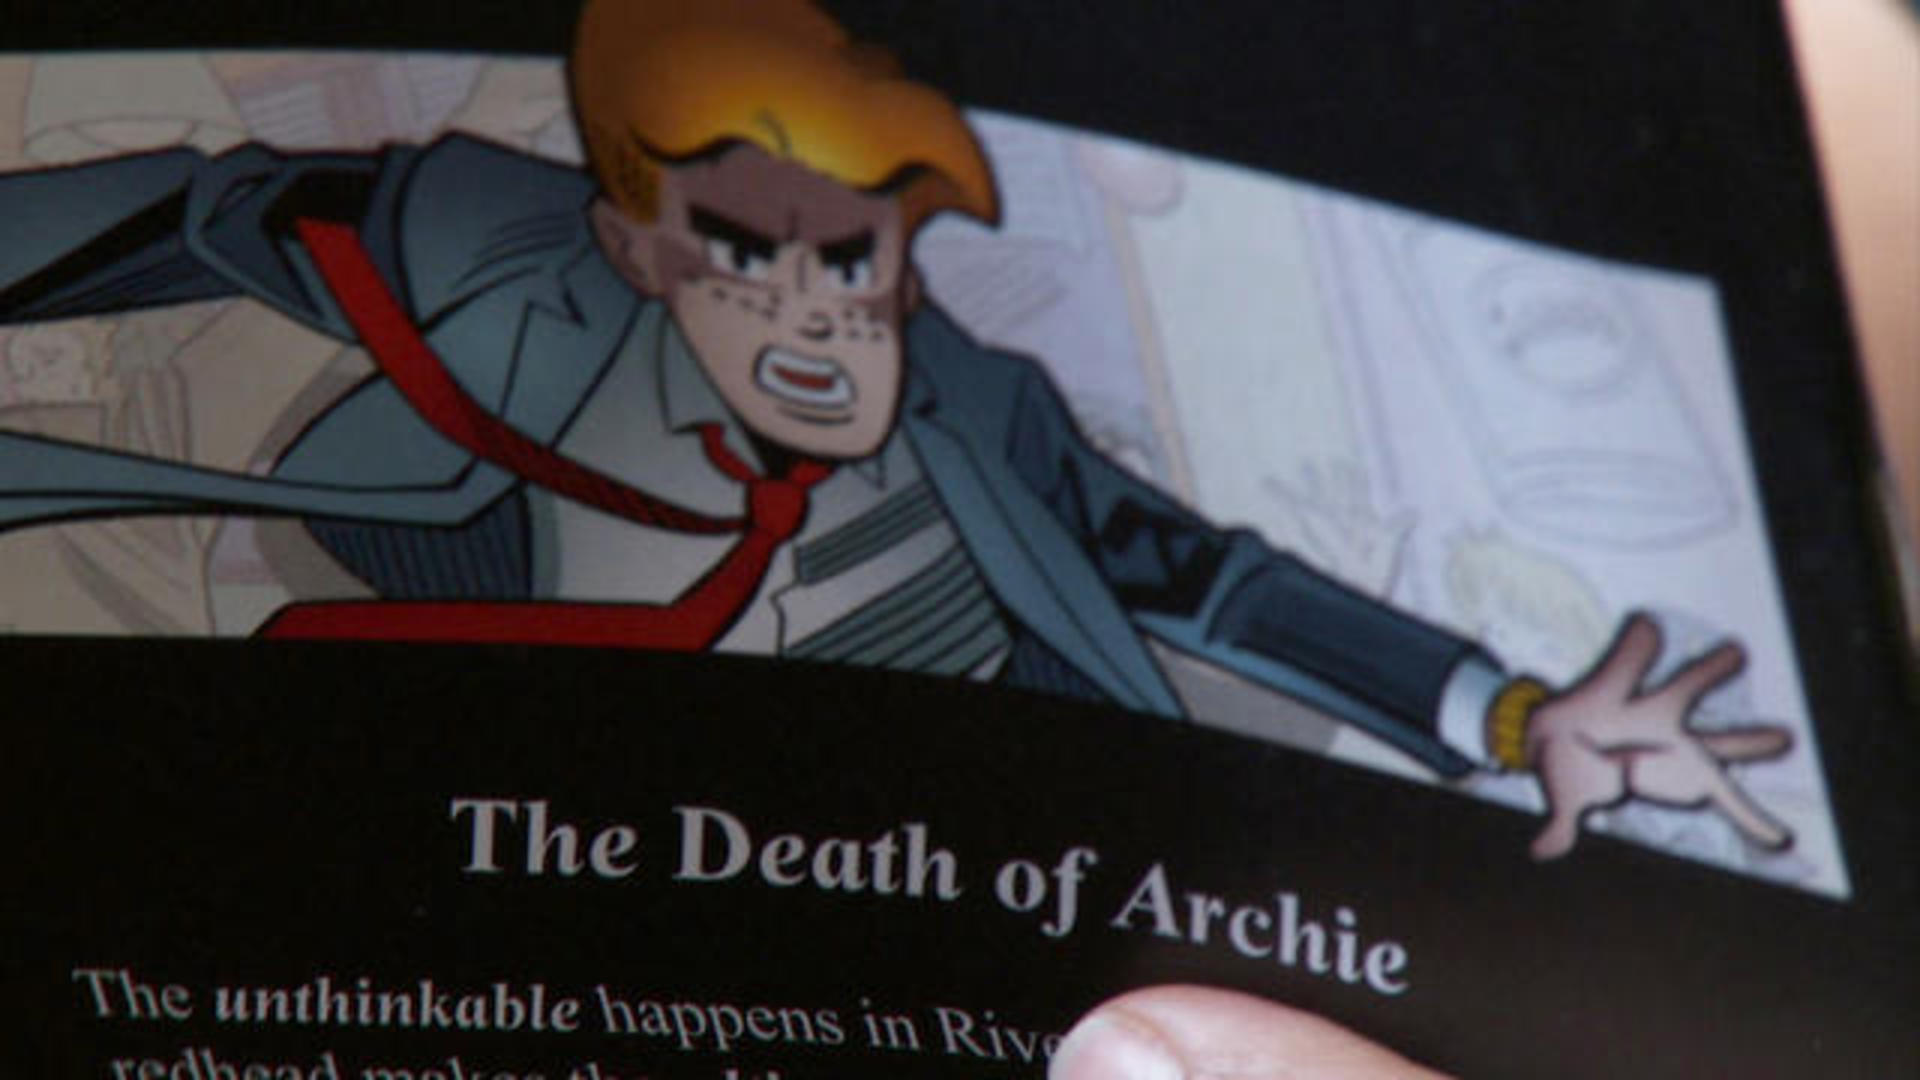 Is it really goodbye? Archie fans mourn comic book icon